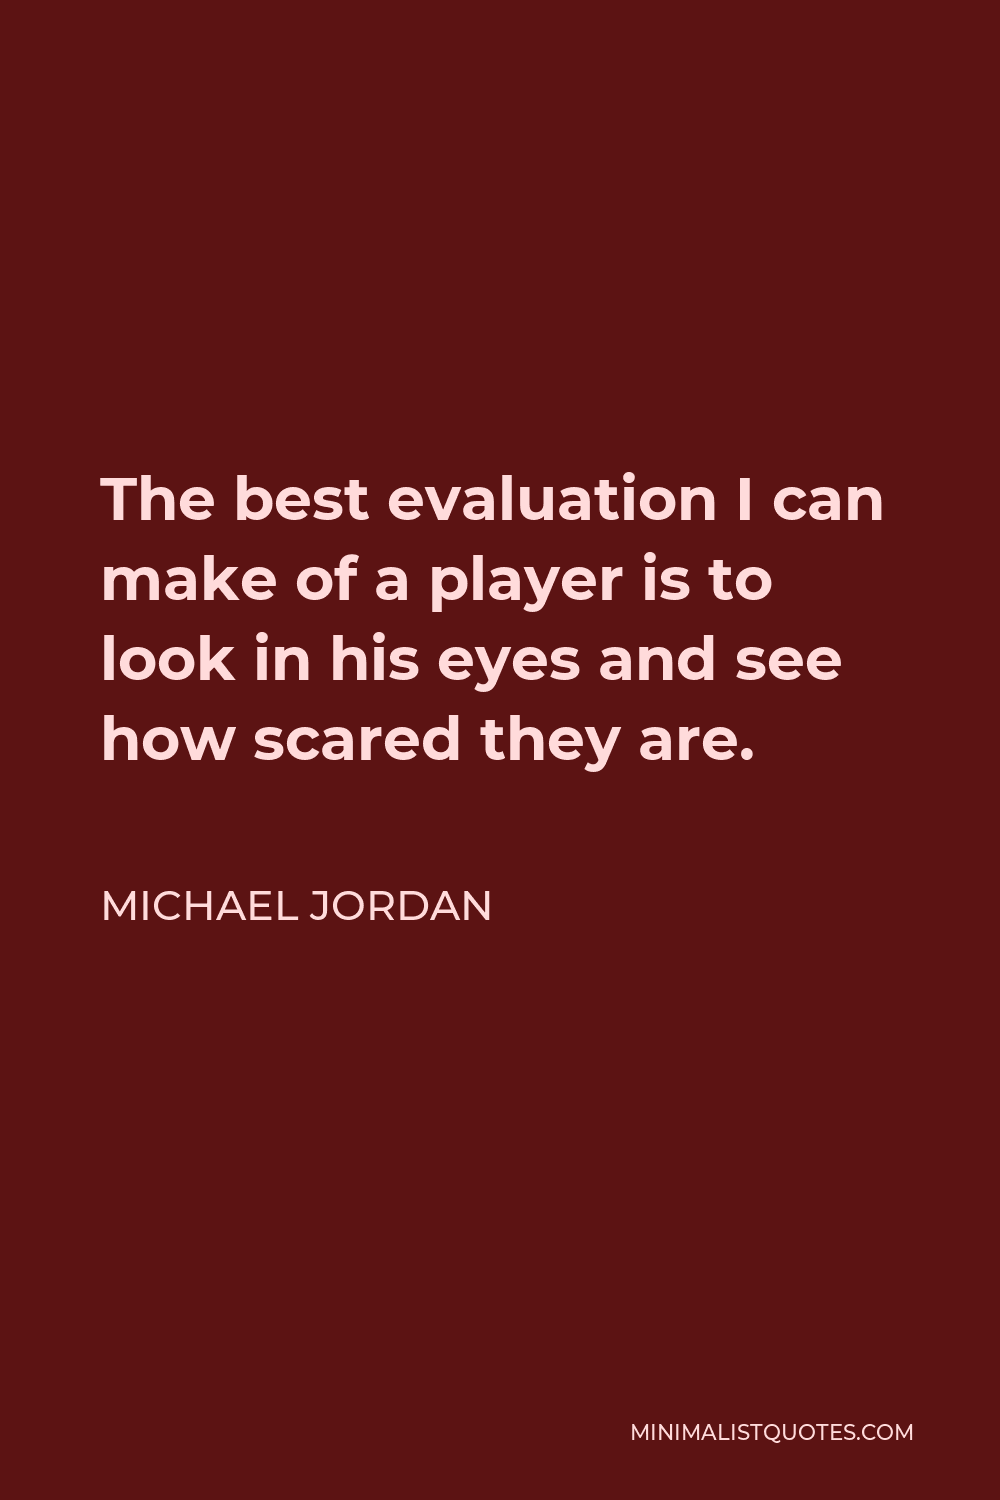 Michael Jordan quote: I'm a firm believer in goal setting. Step by